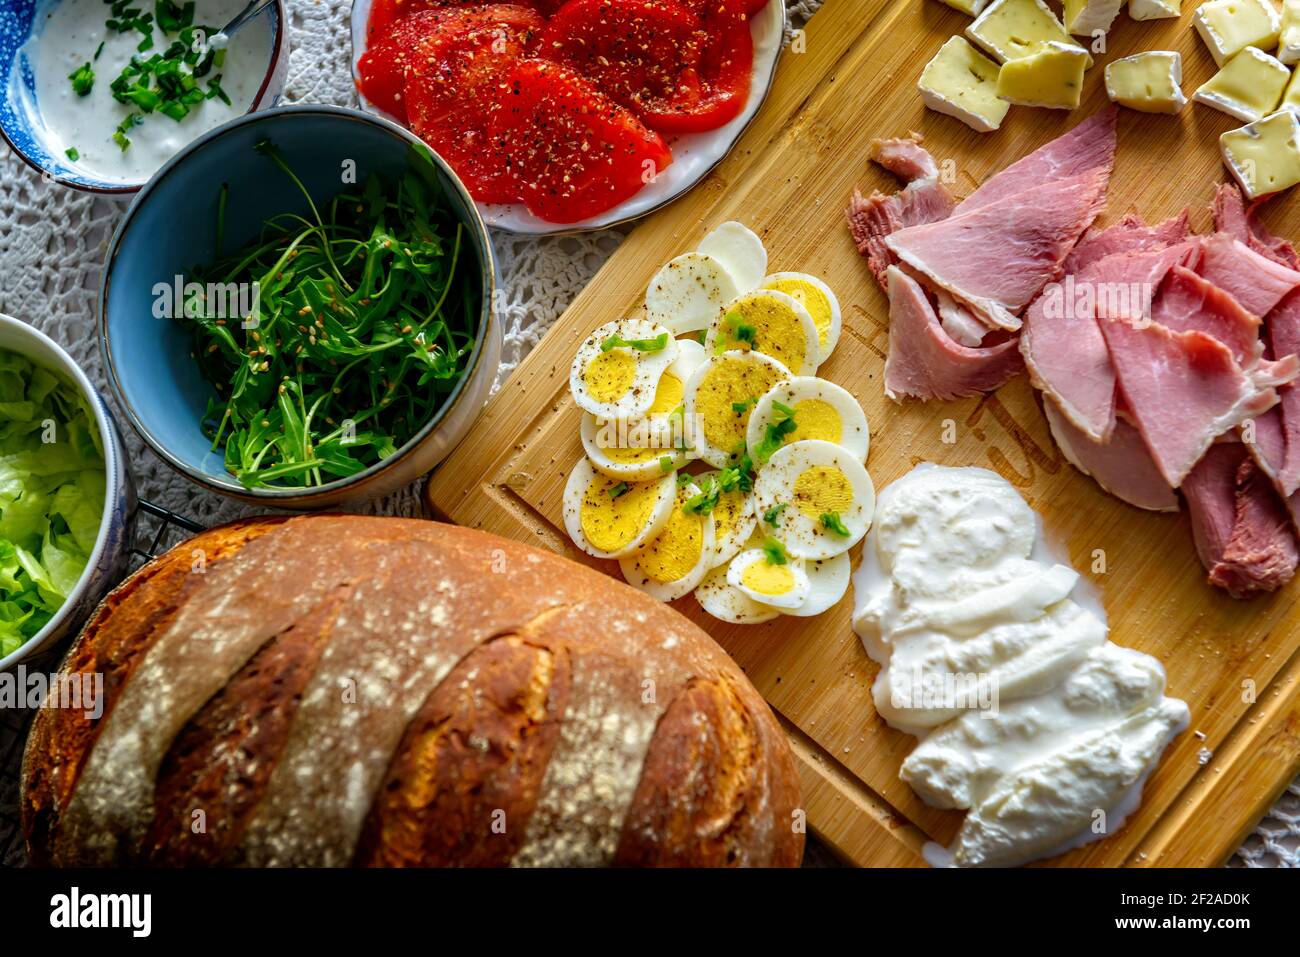 Continental, healthy breakfast containing homemade bread, vegetables tomatoes, argula, sald, cheese burratta, camembert, ham and egg. Stock Photo